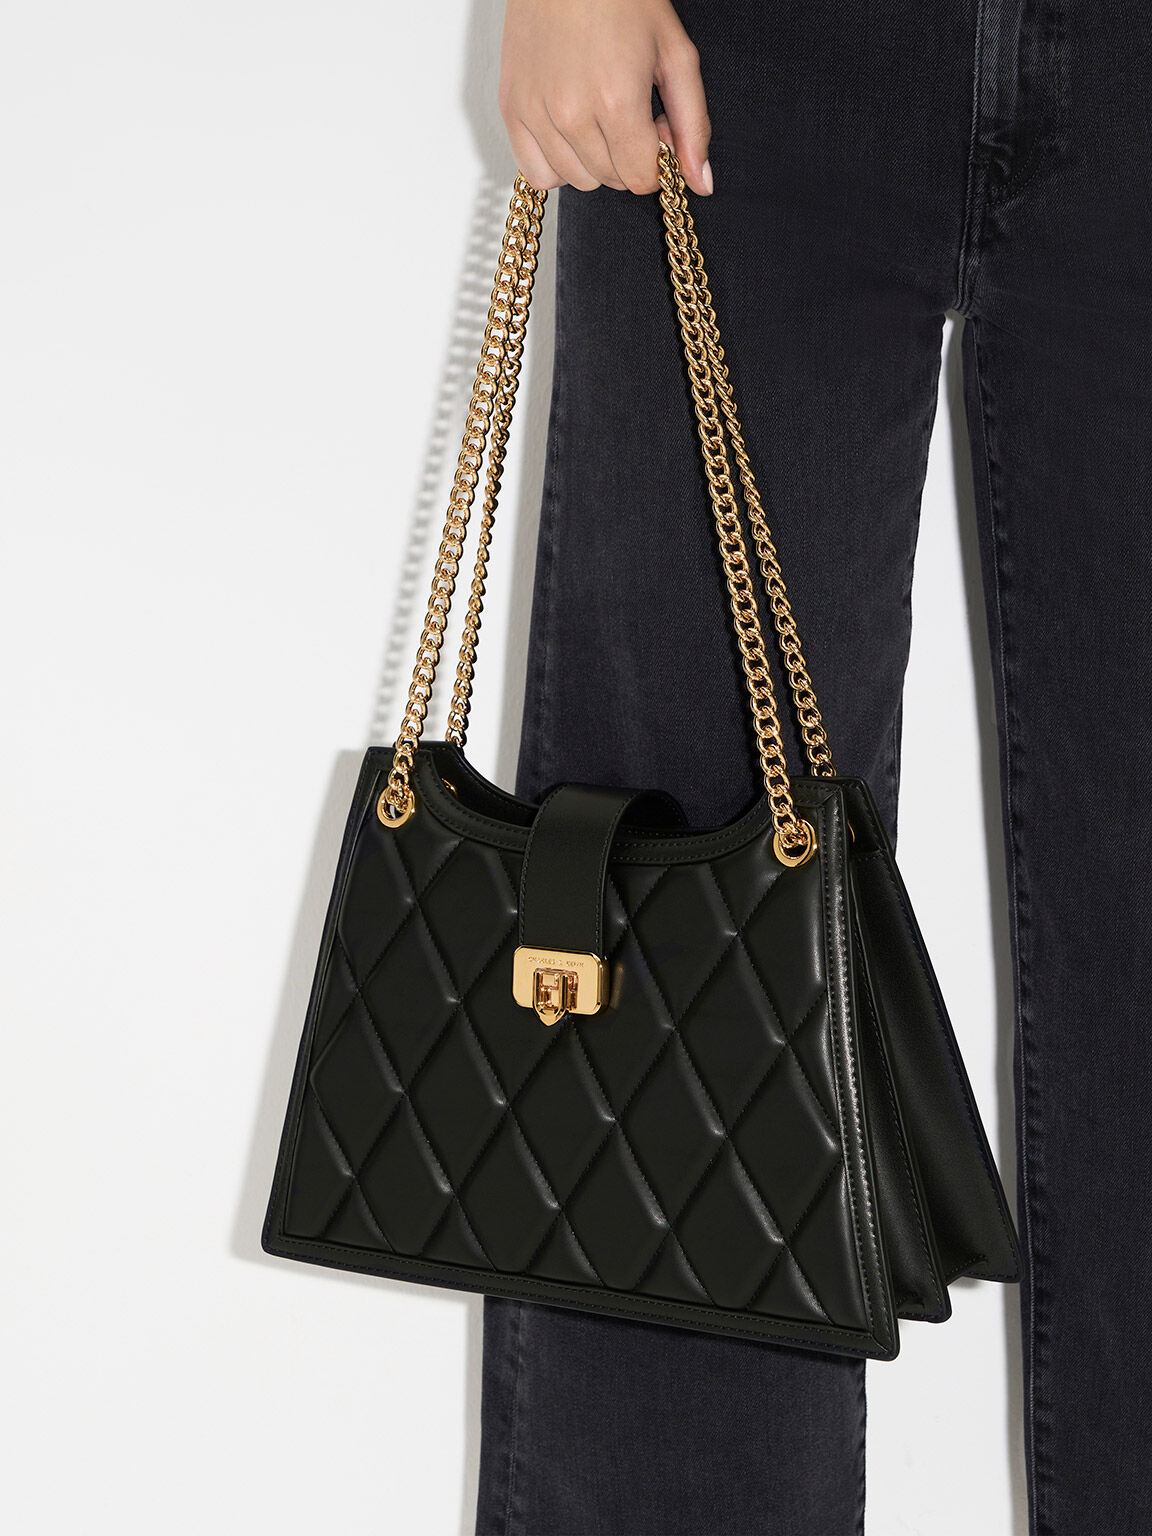 TÚI ĐEO CHÉO CNK CHARLES KEITH CRESSIDA QUILTED TRAPEZE CHAIN BAG CK2-30151307 12